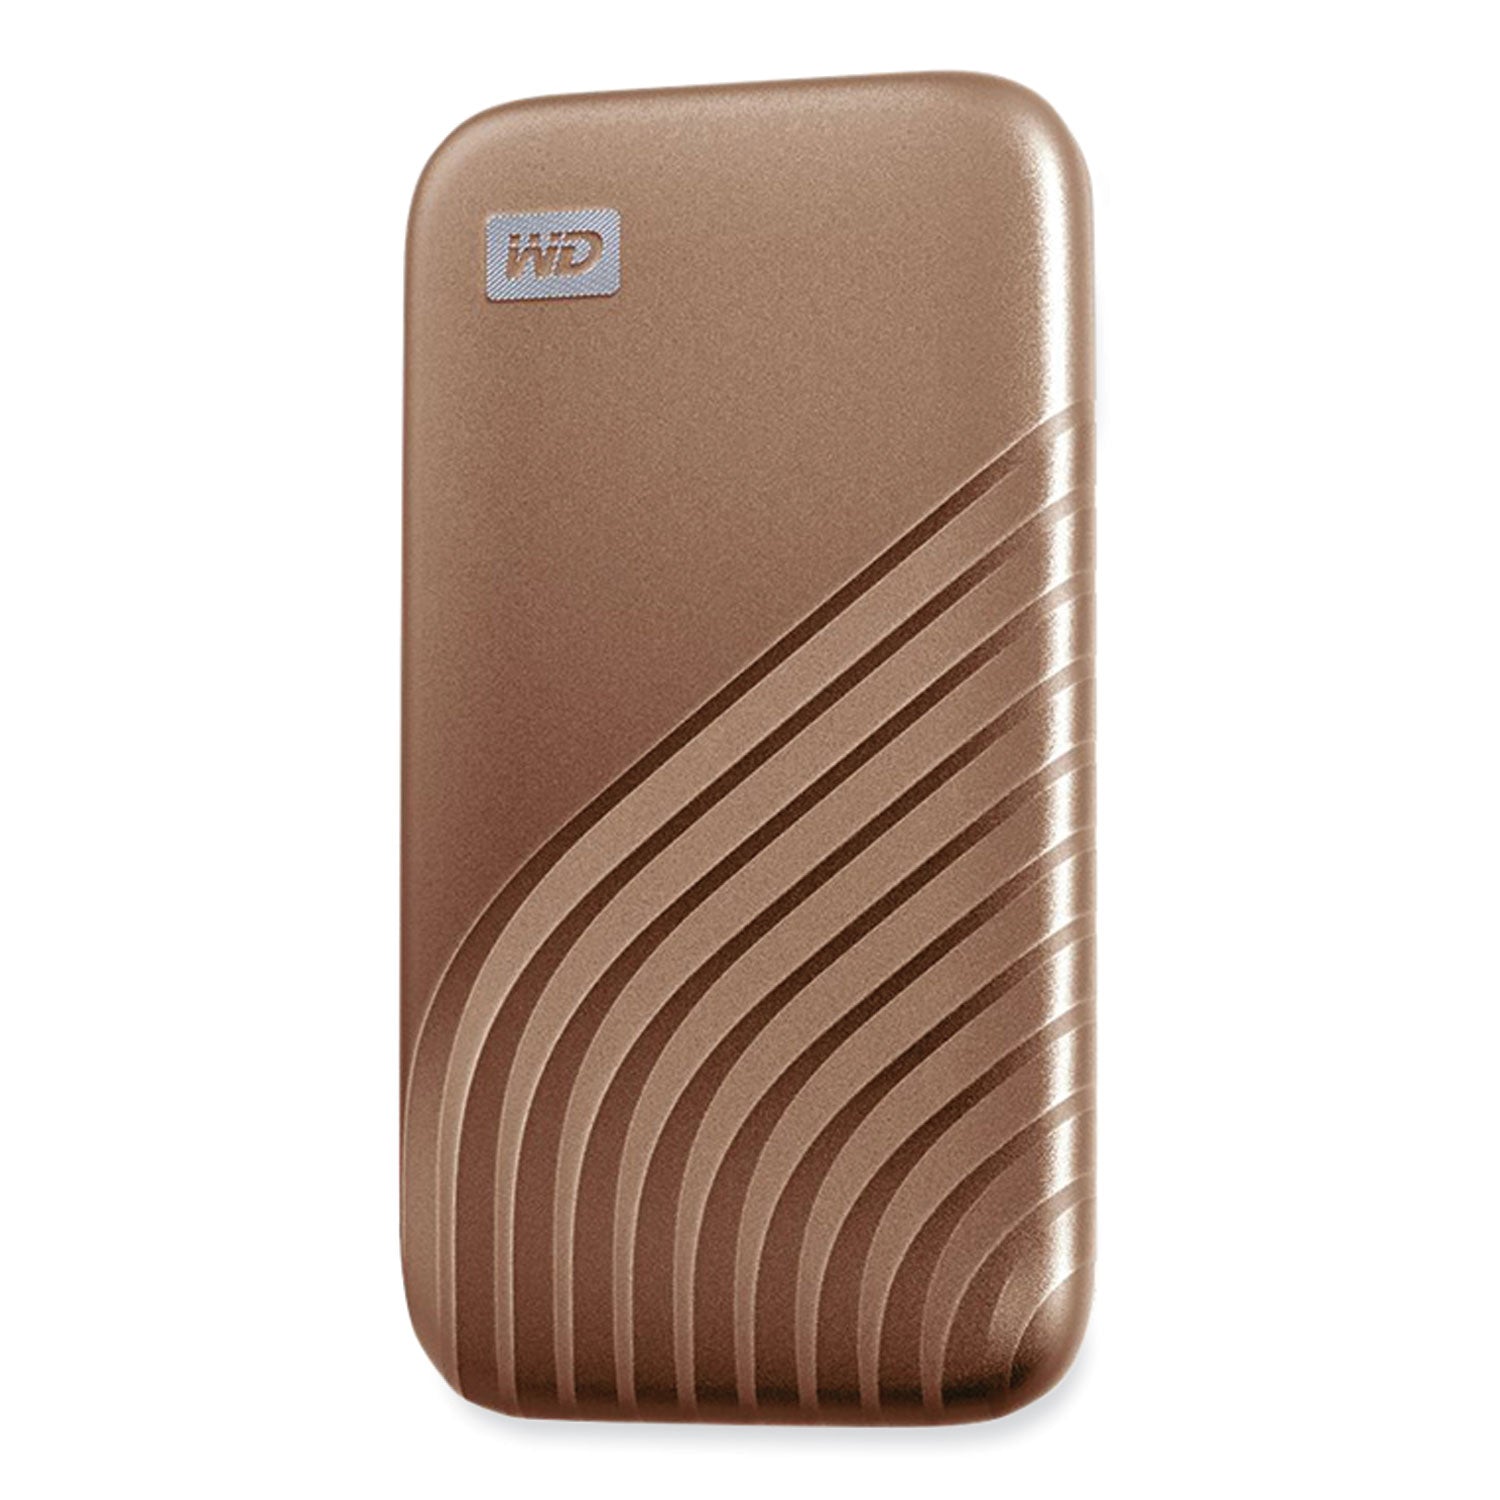 my-passport-external-solid-state-drive-1-tb-usb-32-gold_wdcagf0010bgd - 3